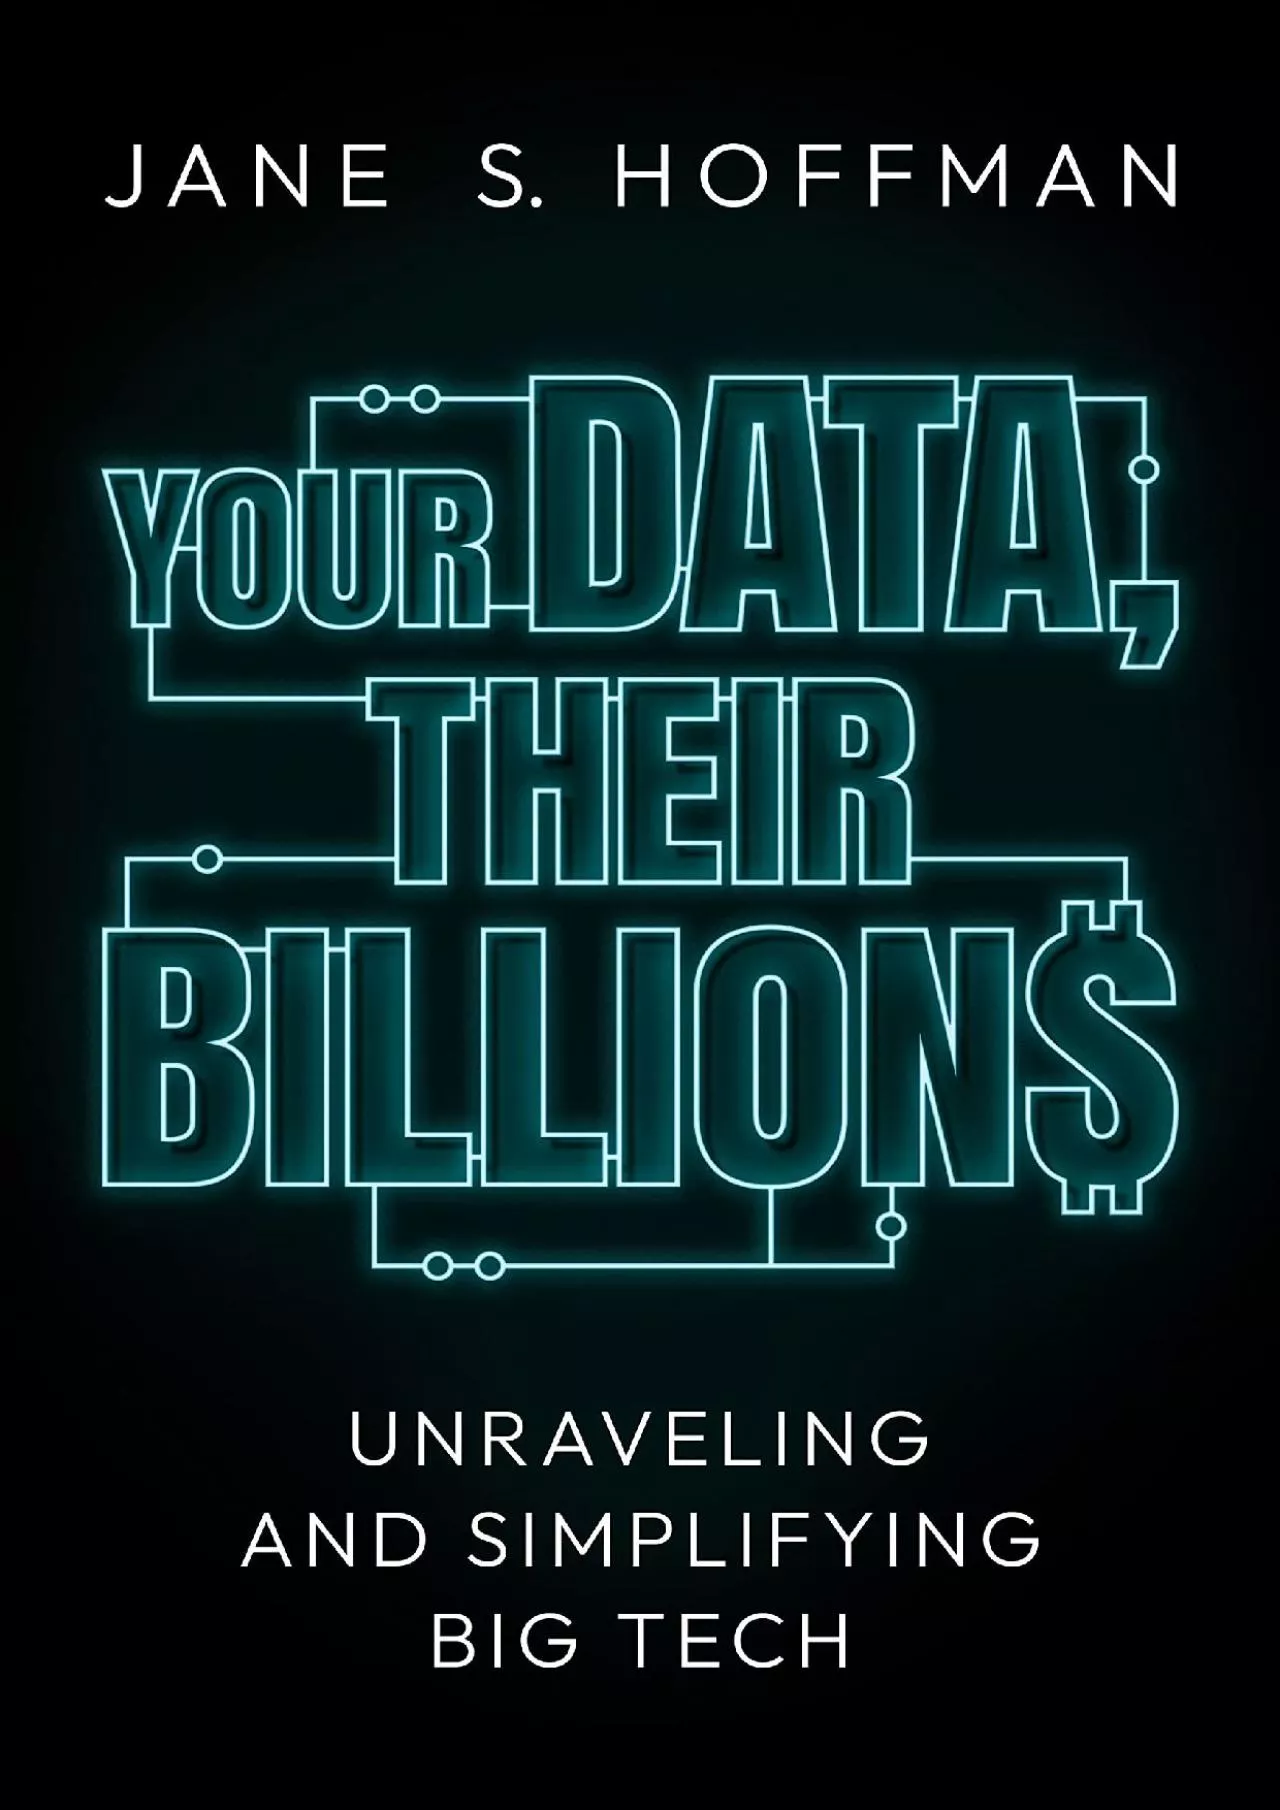 Your Data, Their Billions: Unraveling and Simplifying Big Tech